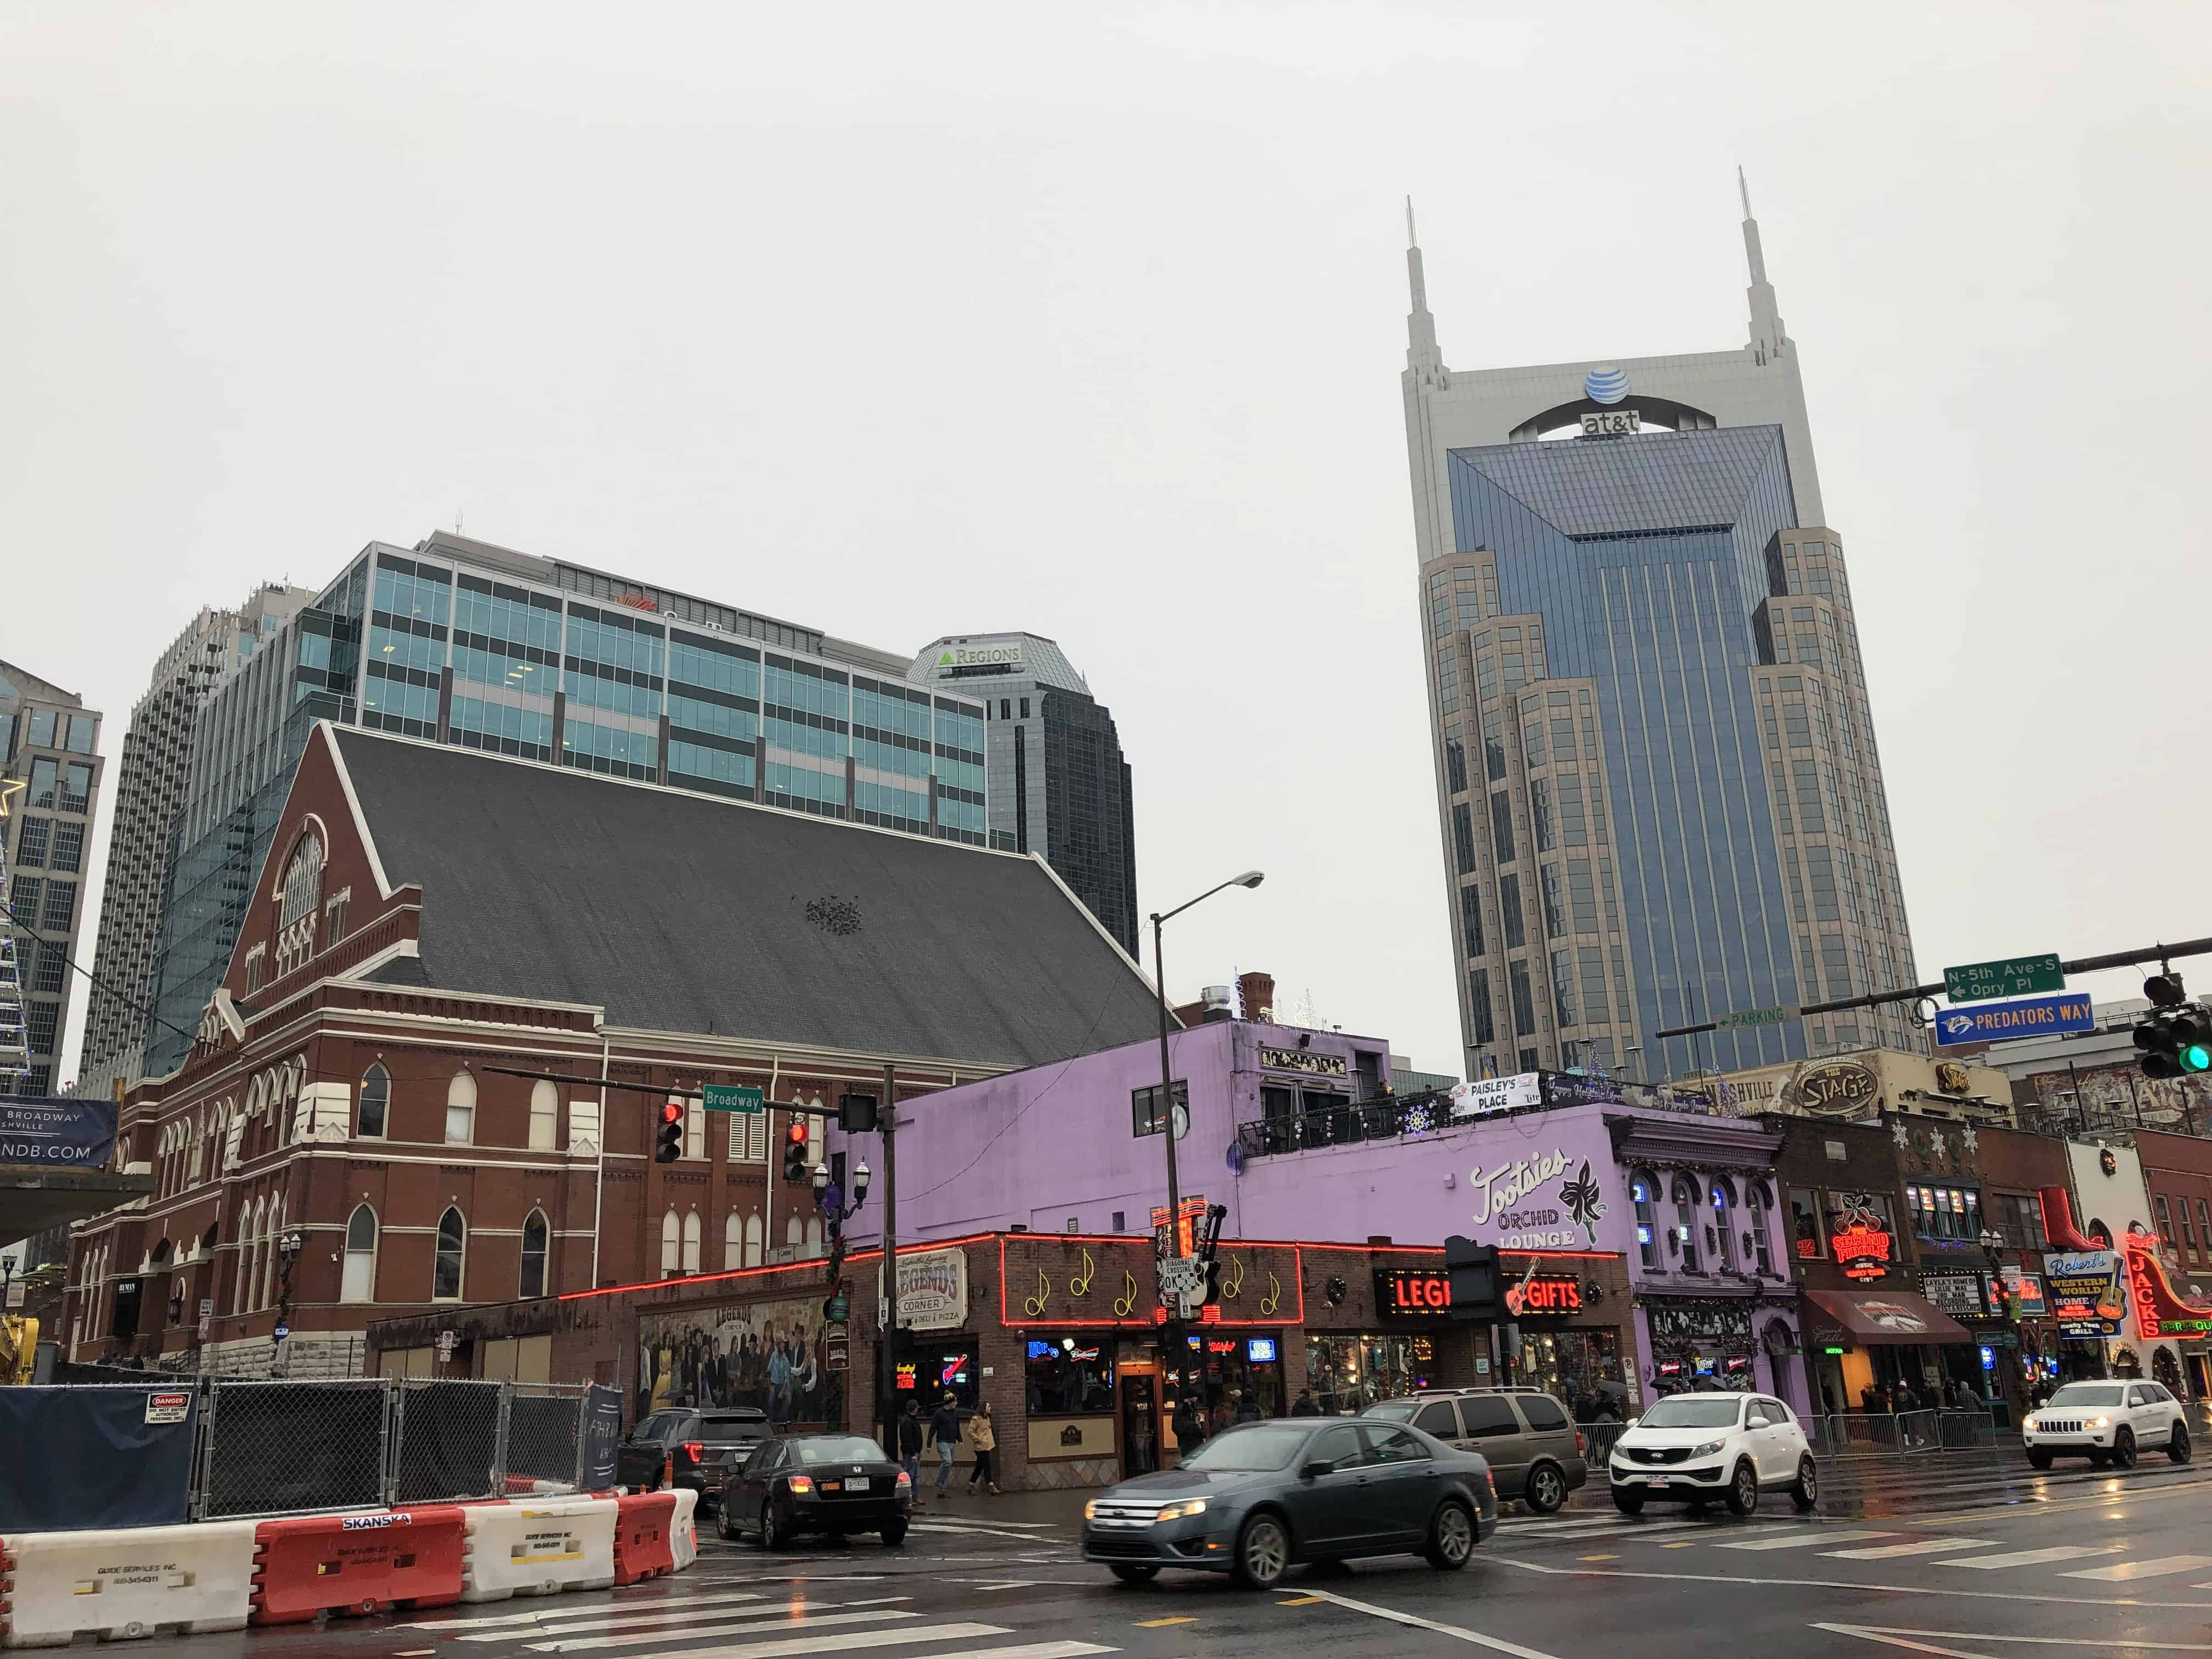 Ryman Auditorium (left) and AT&T Building (right) in Nashville, Tennessee